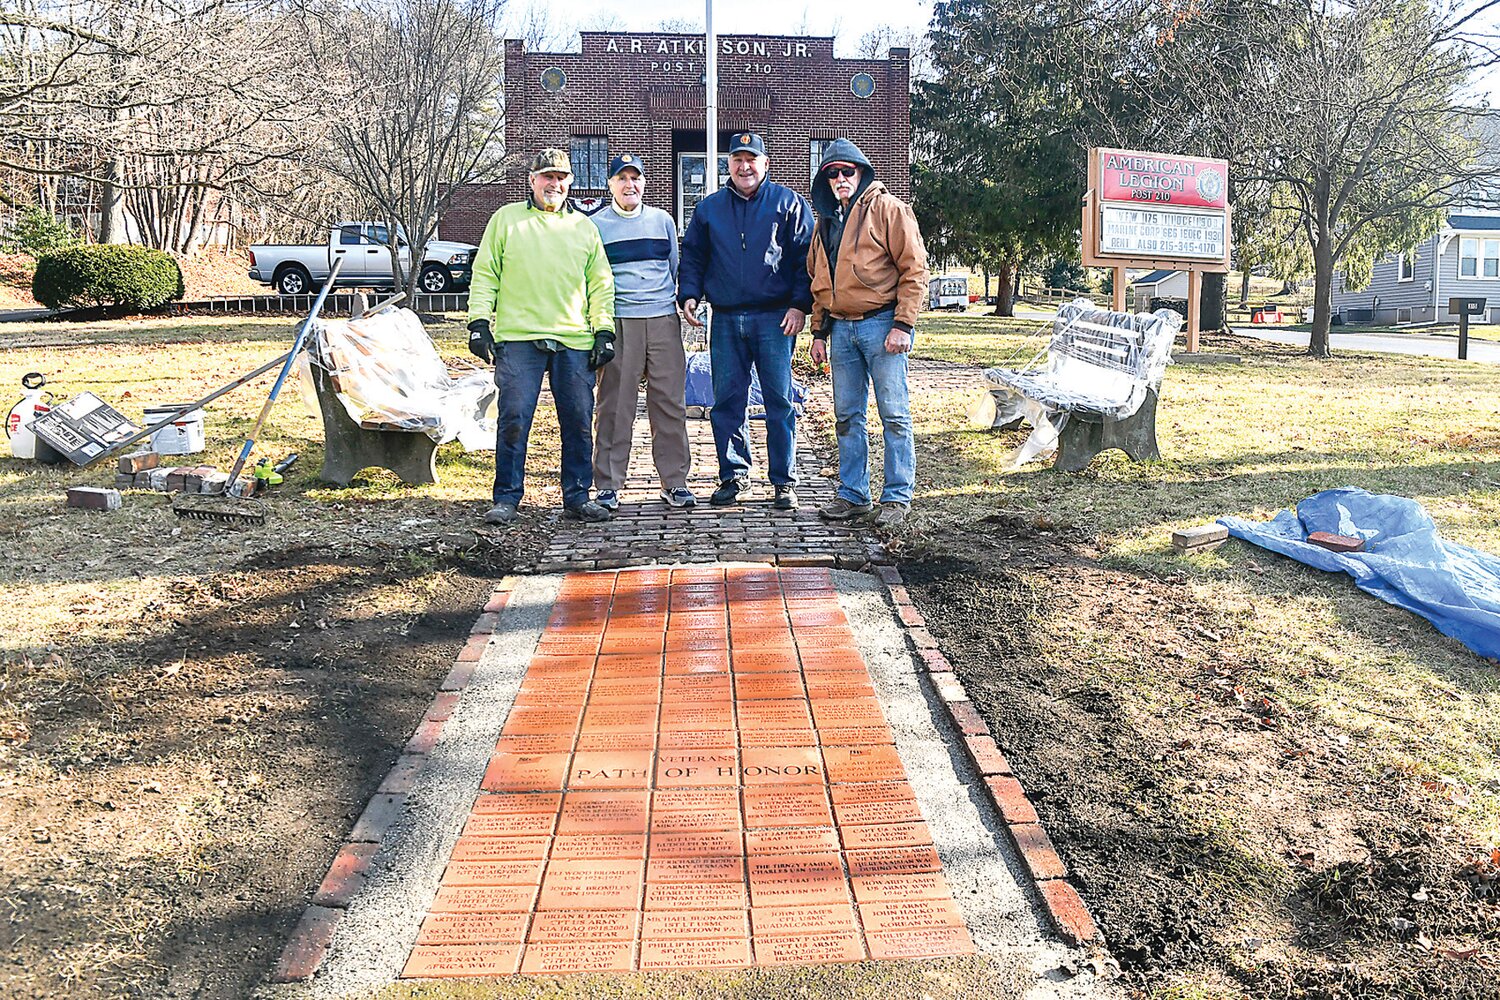 From left are Noel Pelletier, Tom Tirney, Tom Darringo and Bob Sundling, standing at the edge of the first section of the Path of Honor at Doylestown American Legion Post 210. The path honors and remembers past and present veterans and service members.